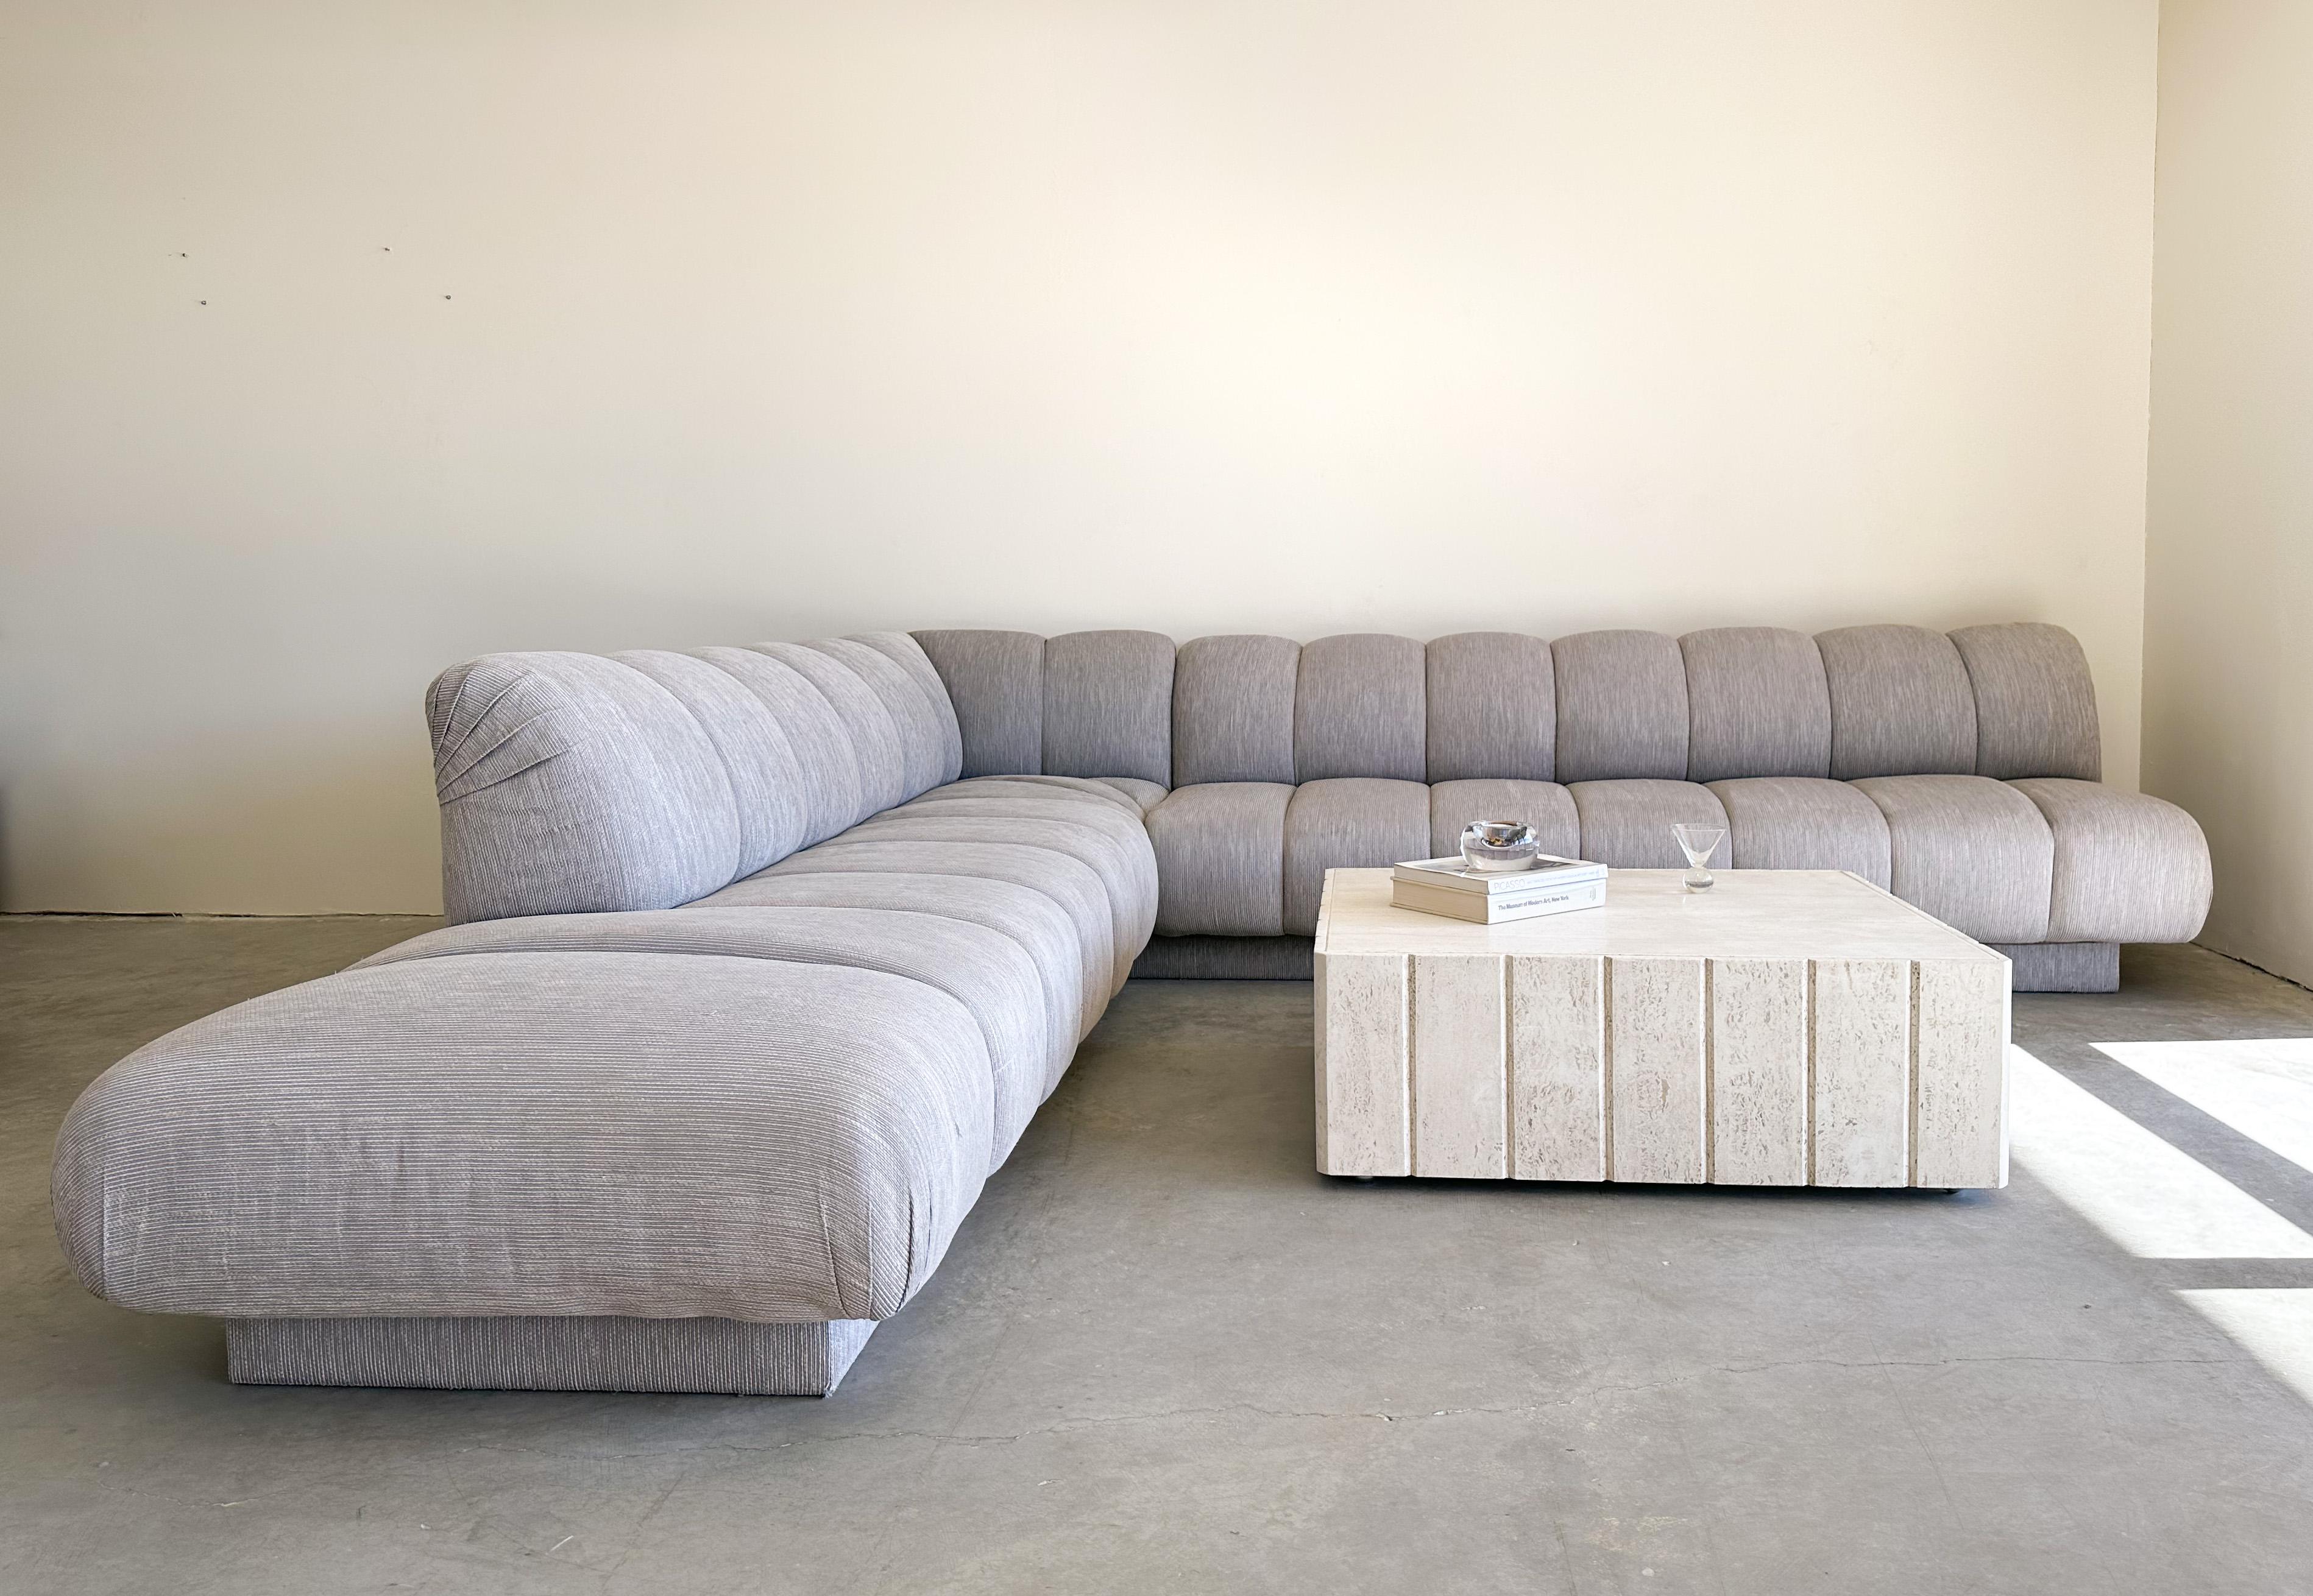 Vintage Steve chase sectional sofa.

The sofa comes in 2 sections. The fabric has a texture and is in a stripe pattern.
I think it will look great reupholstered in a boucle or a high pile cotton velvet. 

Color: Light bluish grey